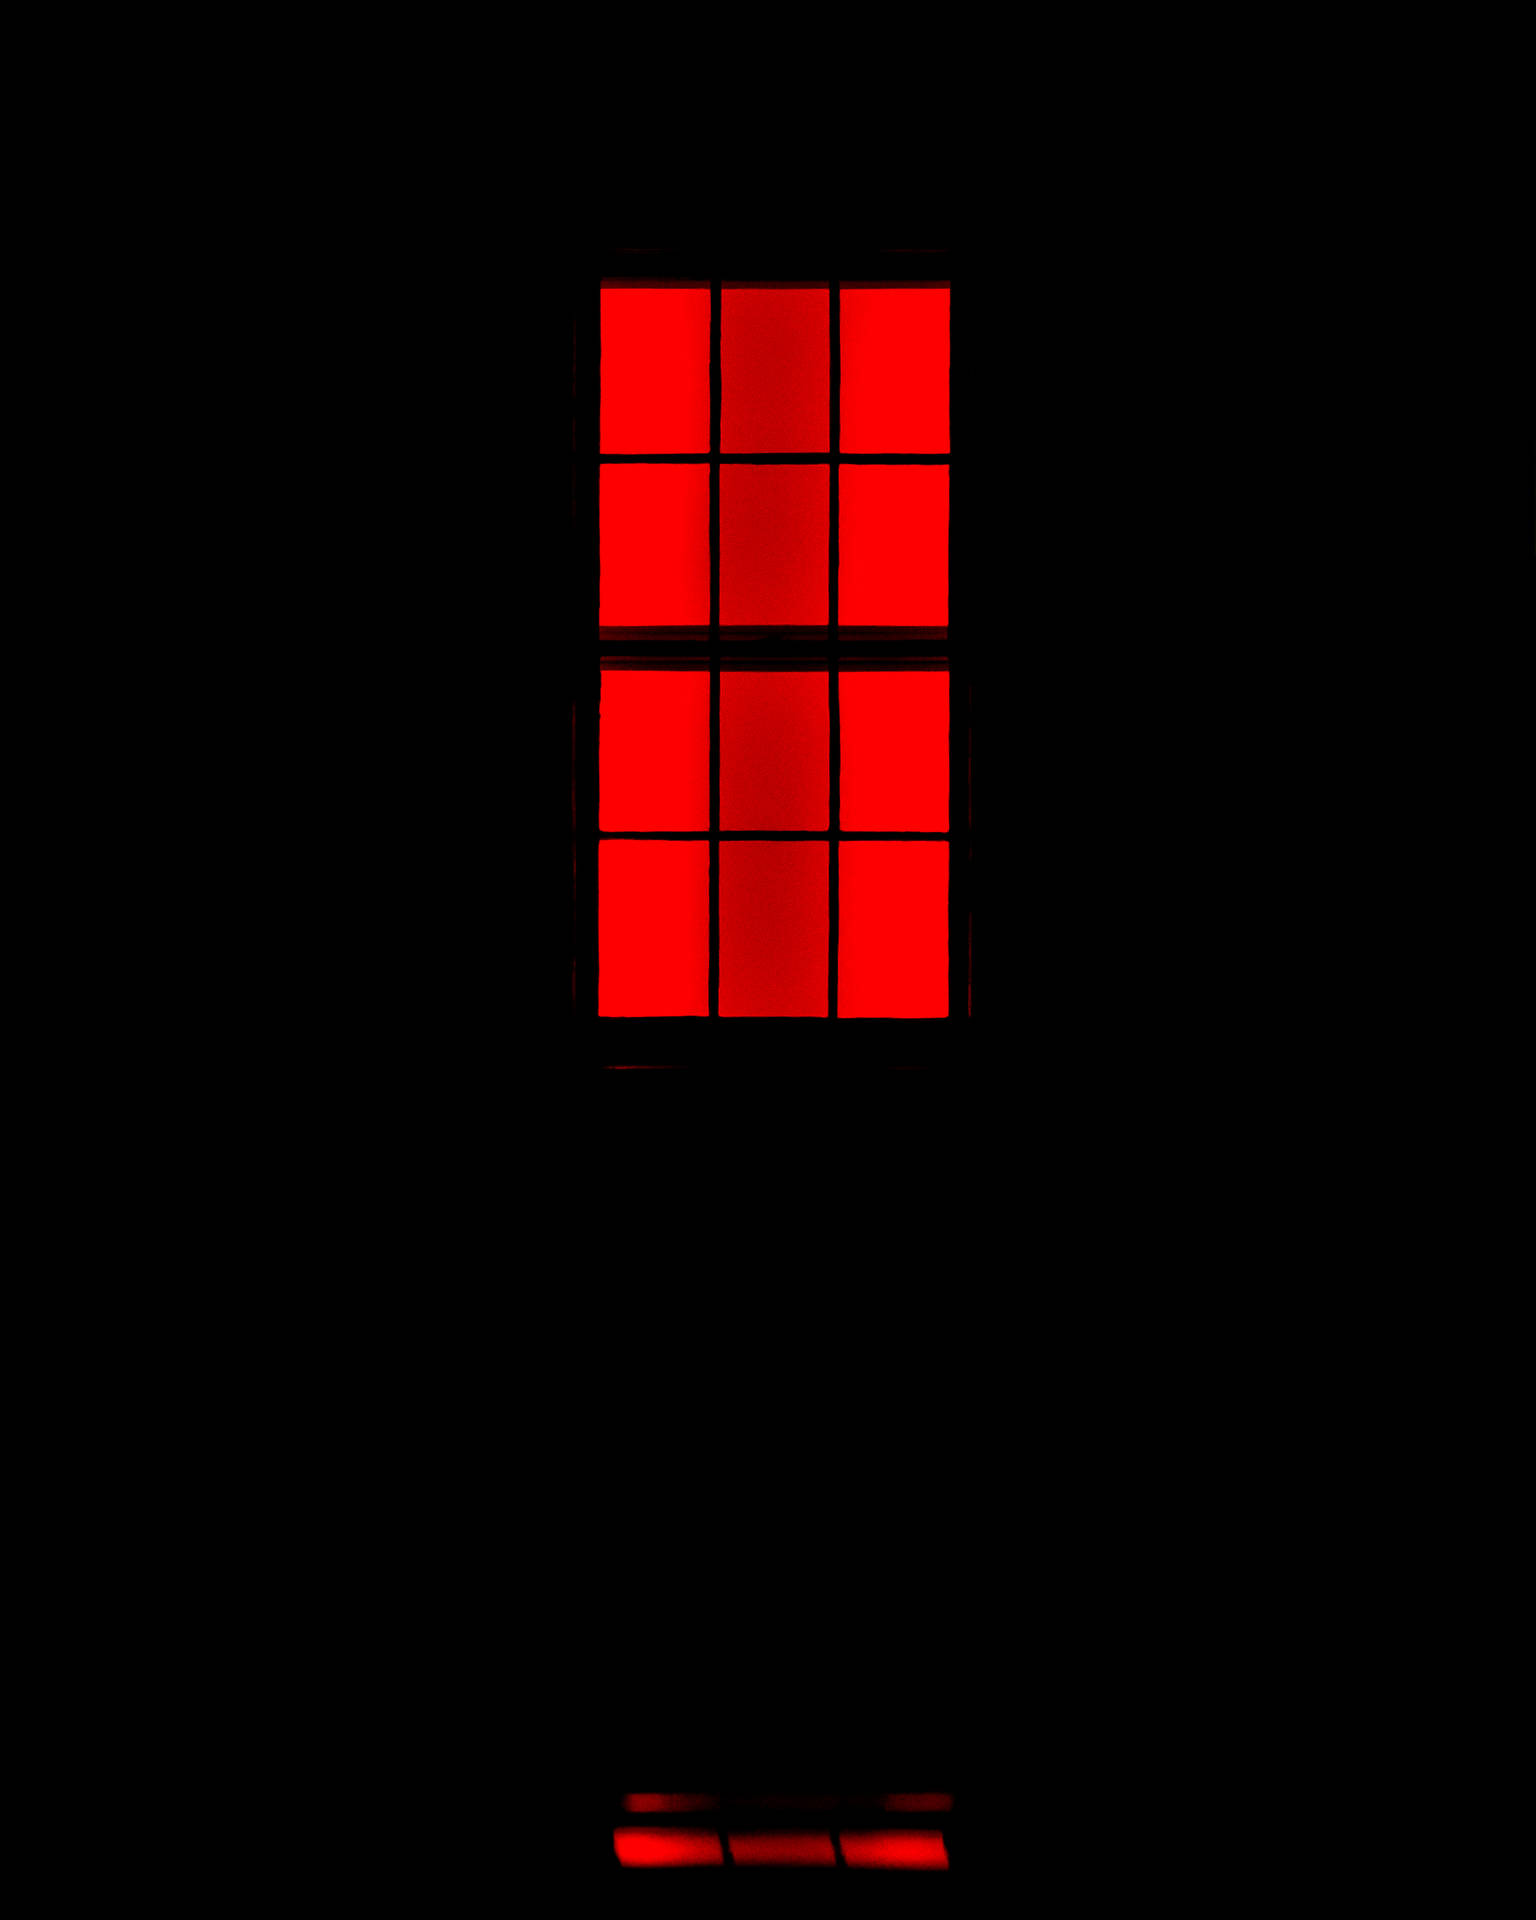 2201X2751 Red And Black Wallpaper and Background